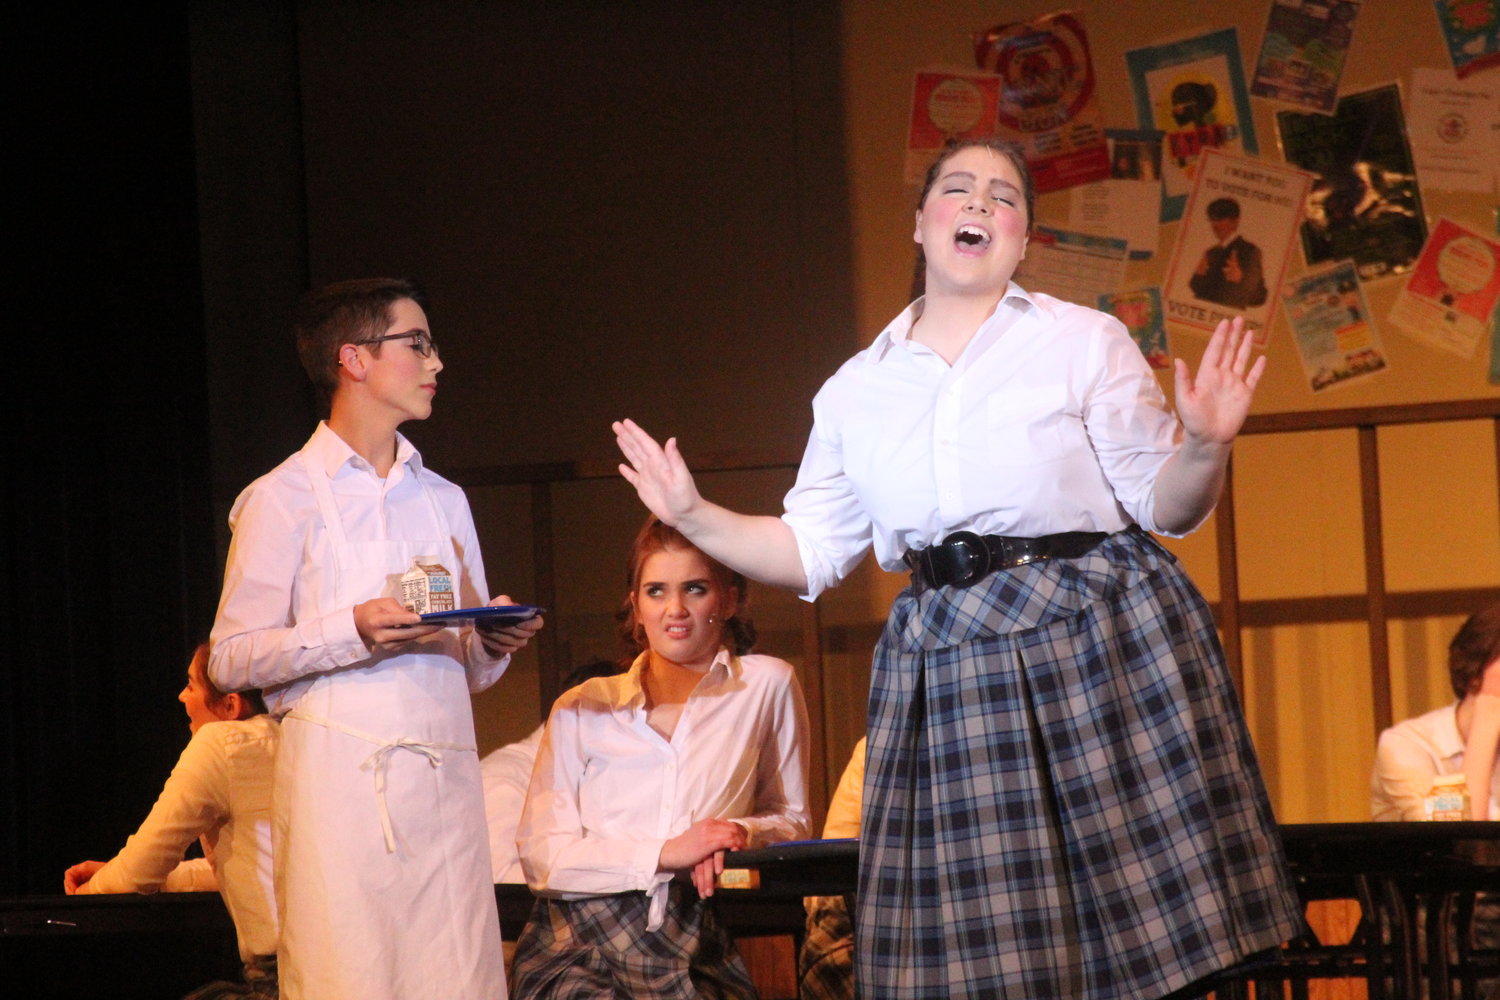 Harriet (Essie Martin) sings to her crush, Martin (Kelby Gingerich), while Emma looks on with disapproval.